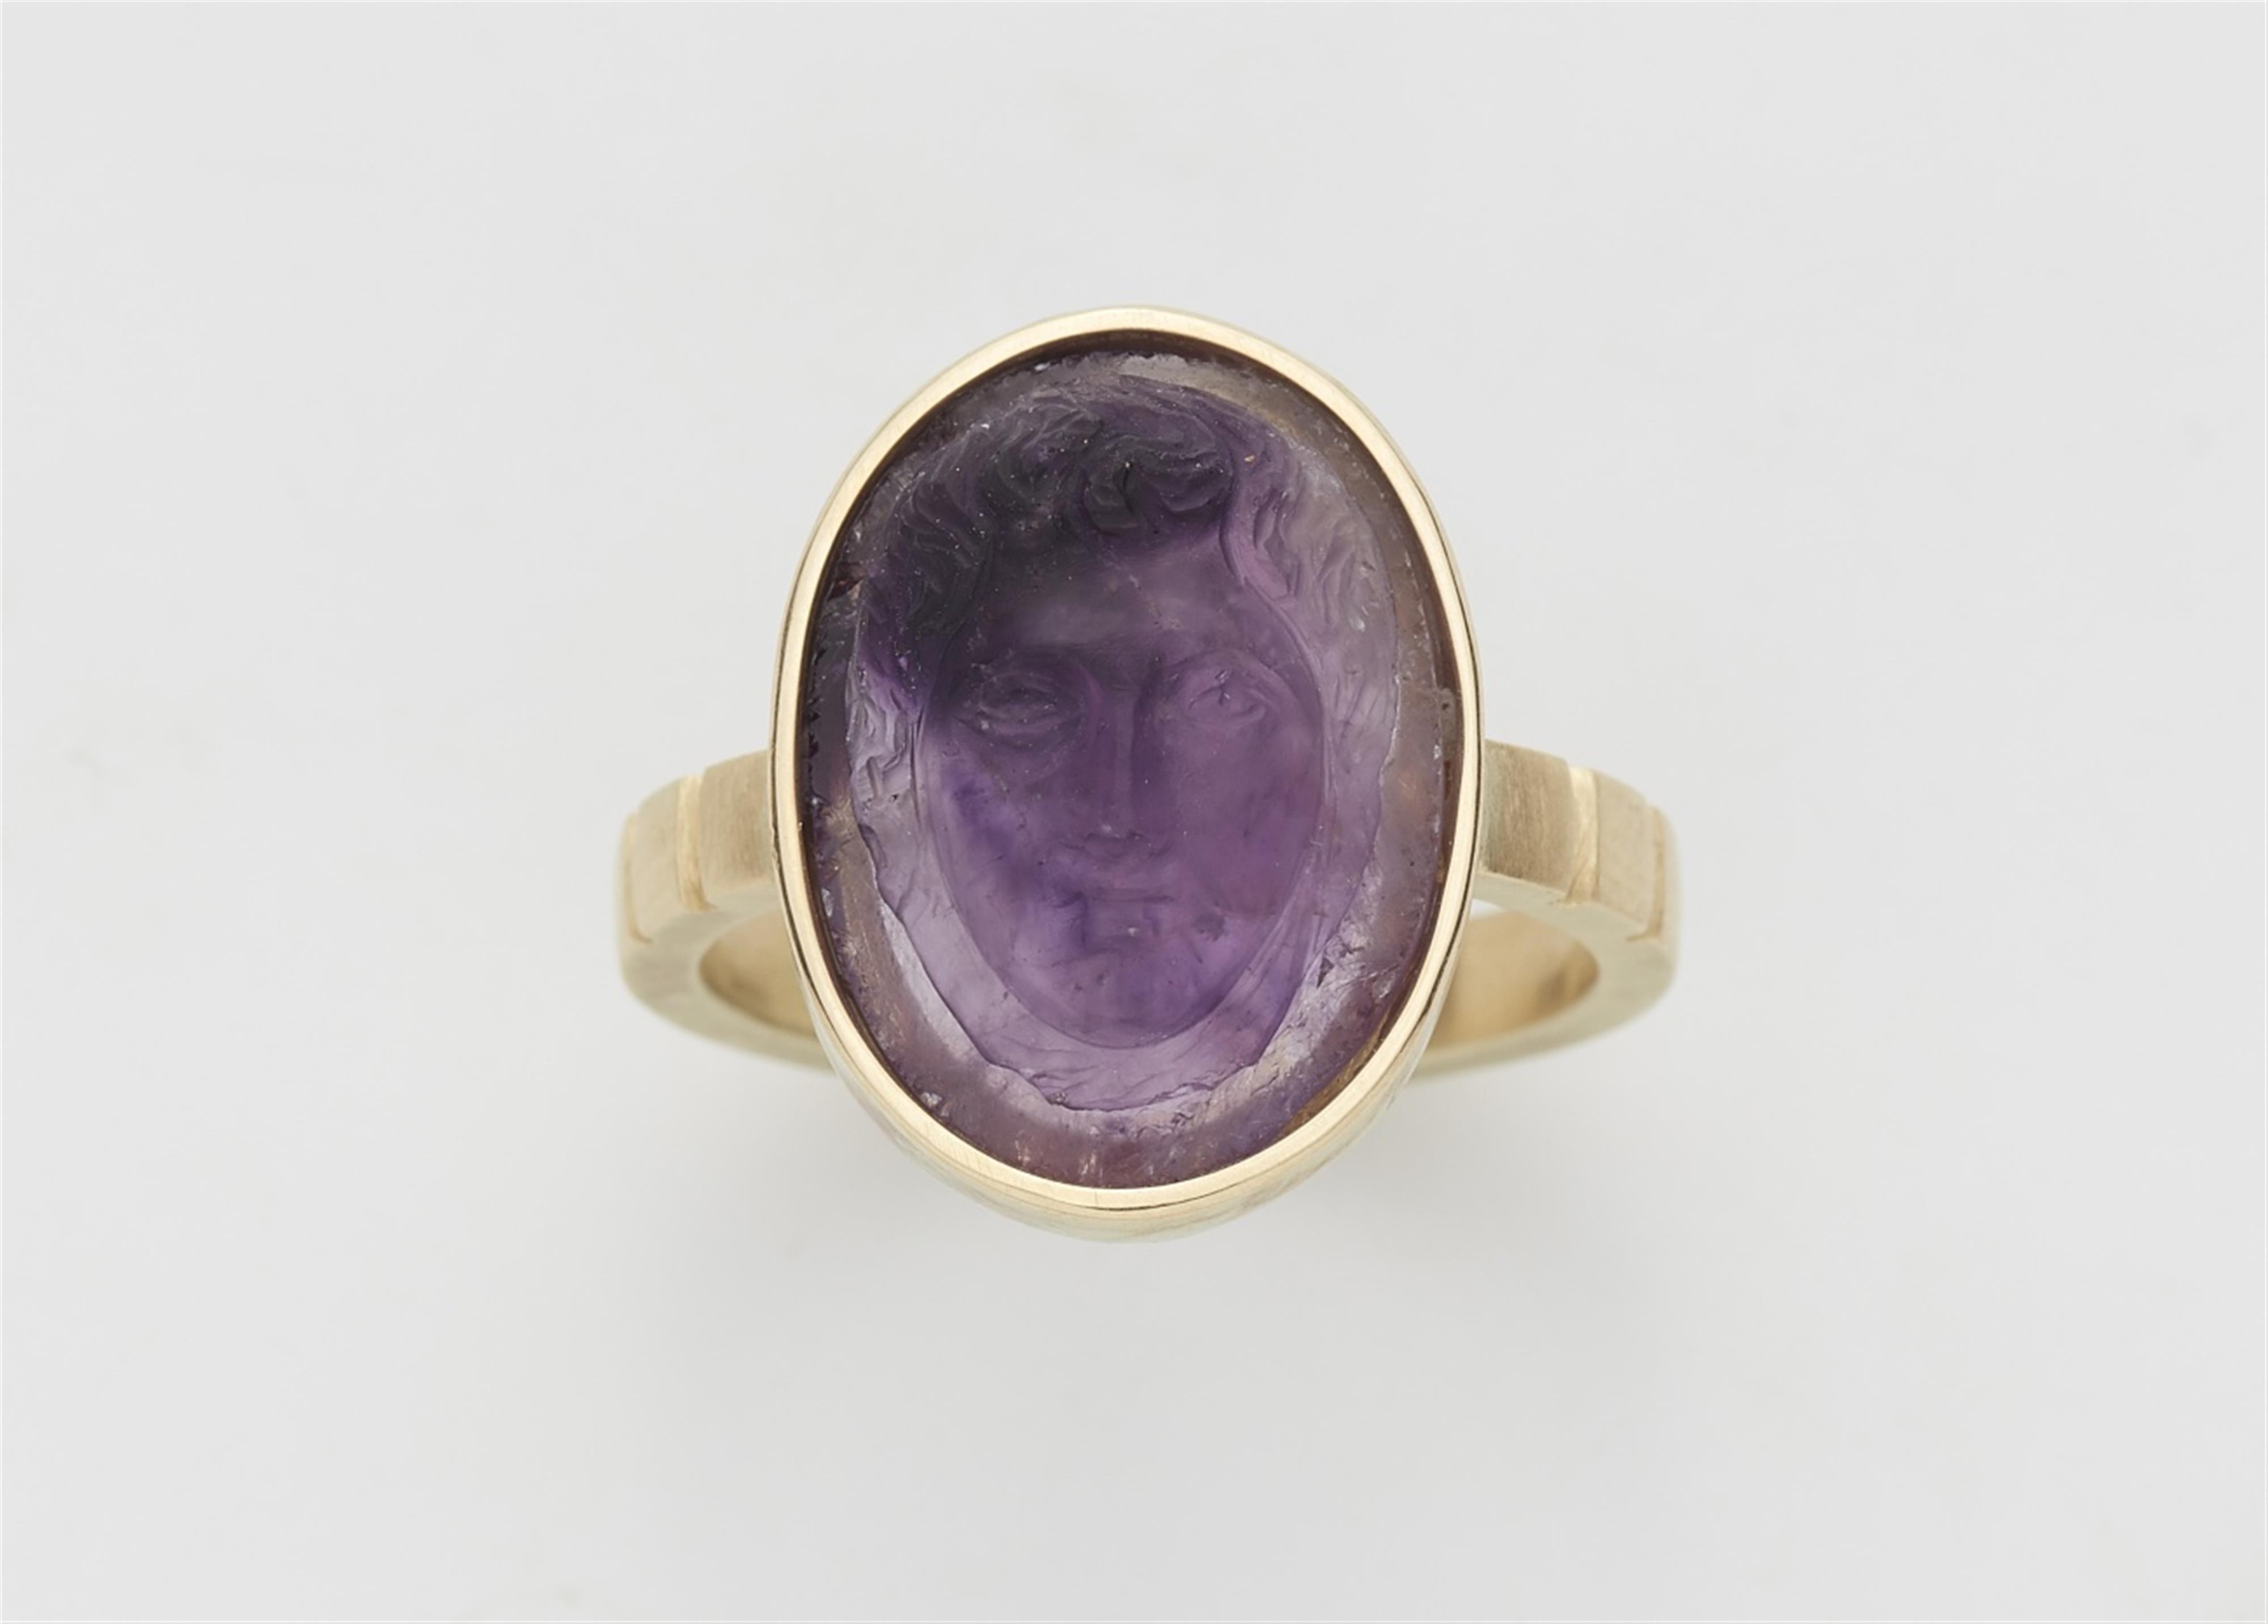 A 14k gold ring with an amethyst cameo - image-1